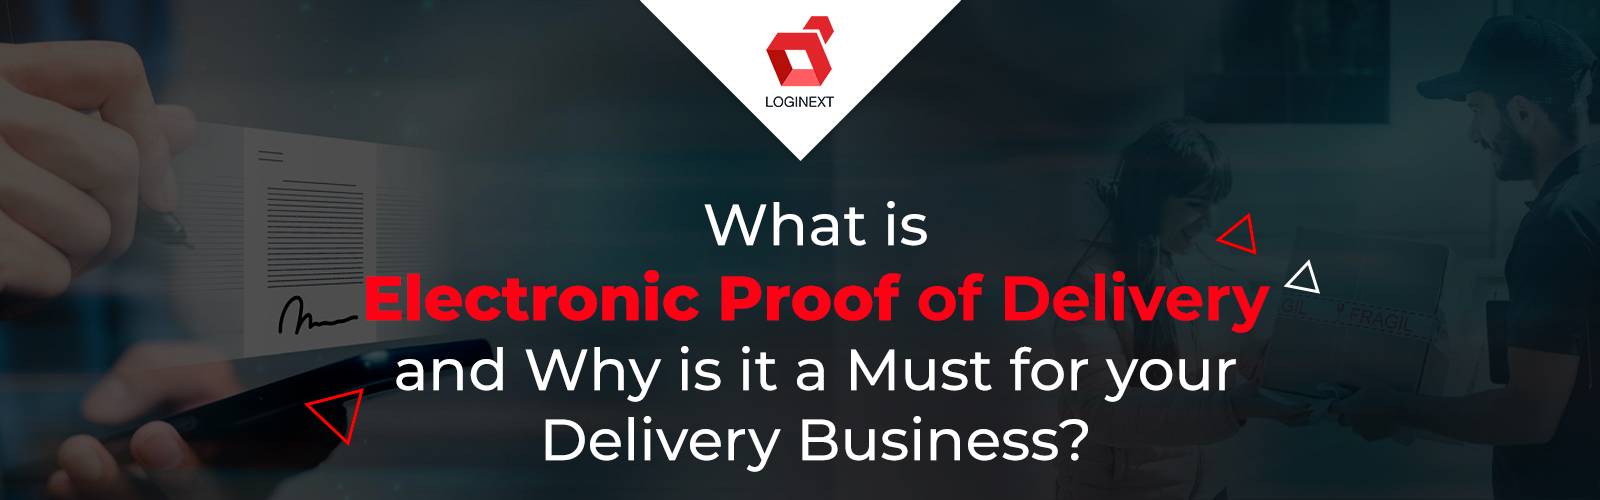 What is electronic proof of delivery_ and why your business should use it